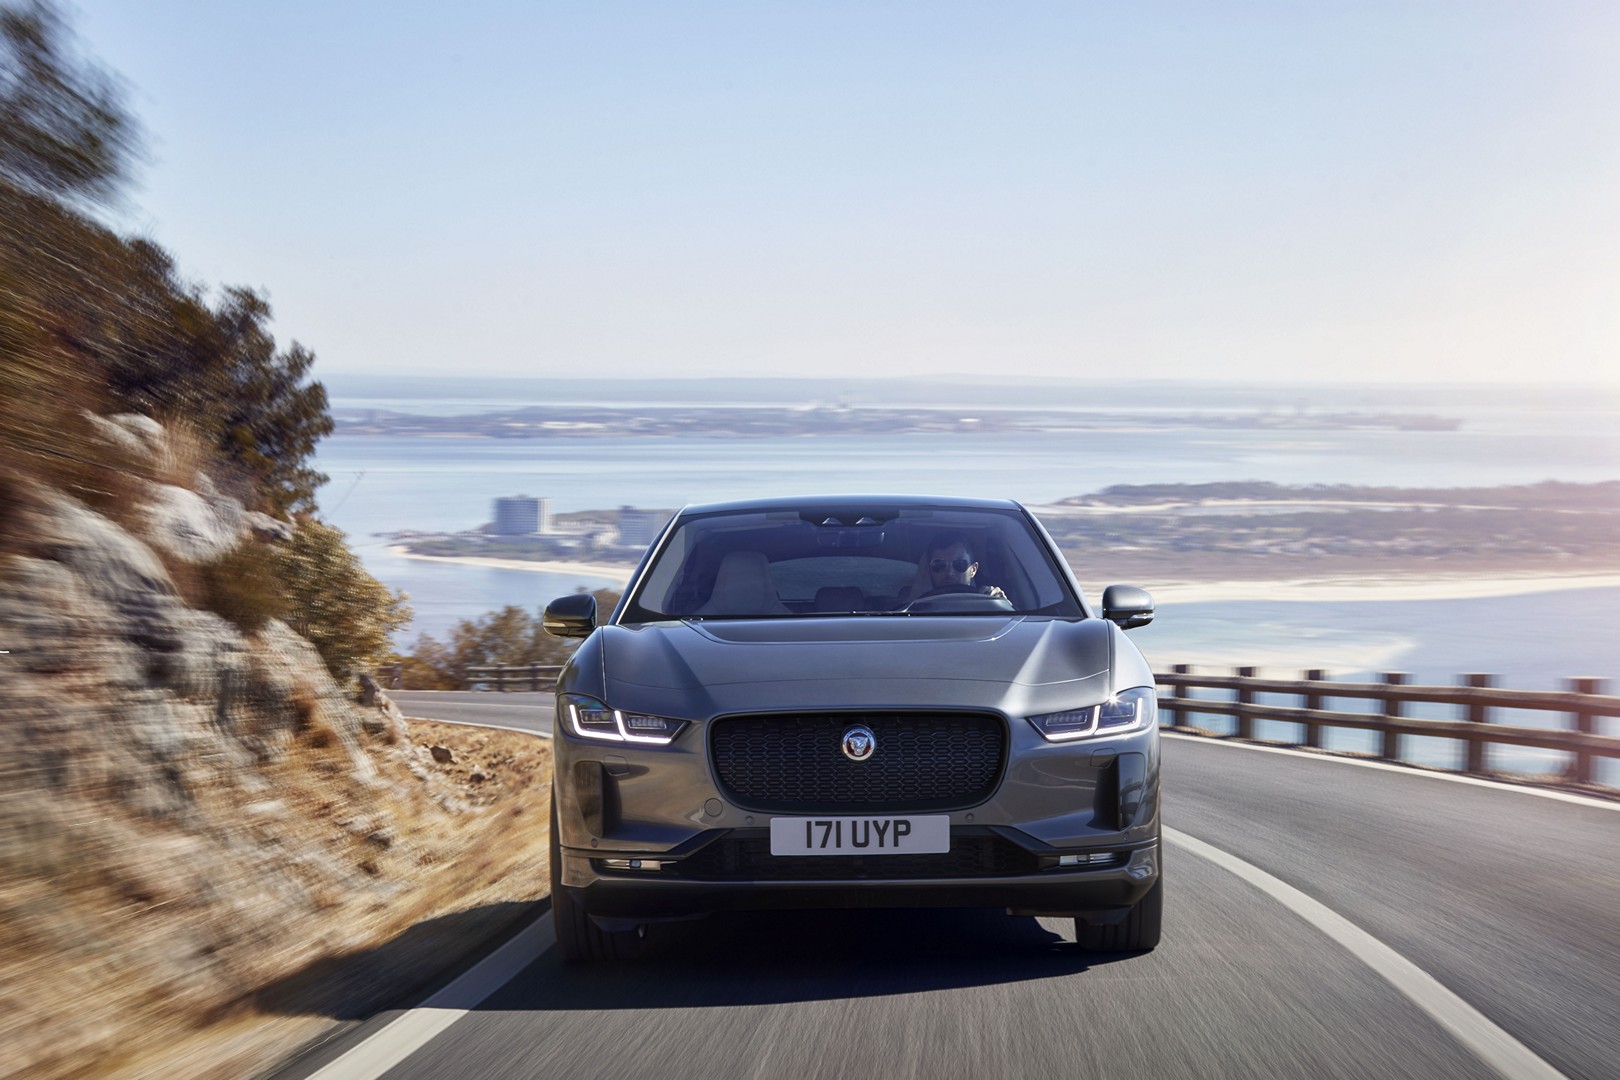 https://s1.cdn.autoevolution.com/images/news/gallery/2020-jaguar-i-pace-update-offers-234-miles-of-range-thanks-to-etrophy-know-how_62.jpg